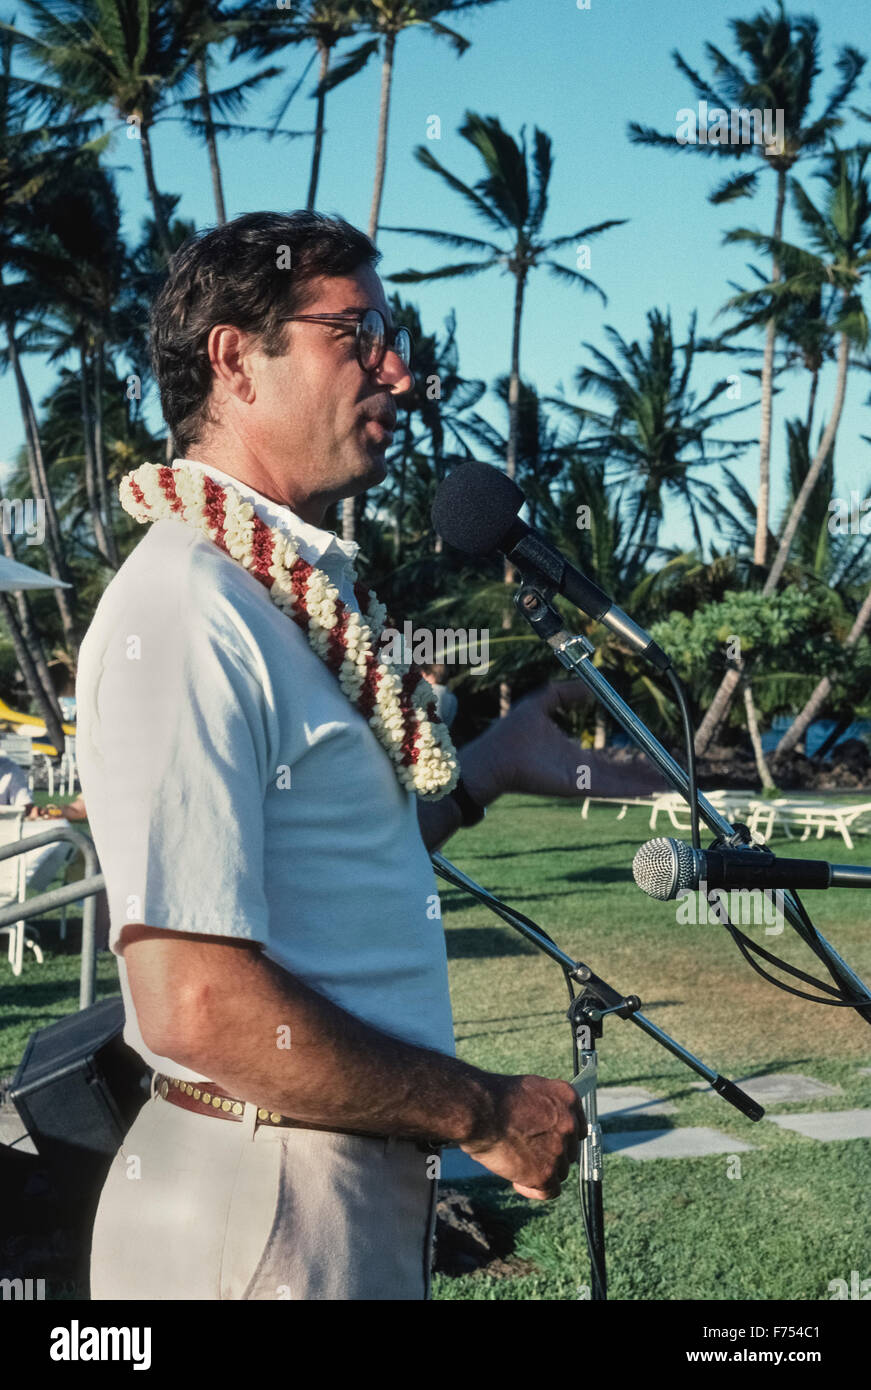 In 1989 at the age of 48, American travel writer and novelist Paul Theroux recalls his adventurous life while giving a talk outdoors in Honolulu, Hawaii, USA. He gained literary fame in 1975 following publication of 'The Great Railway Bazaar' that was based on his trip by train from England to Japan. Next came 'The Old Patagonian Express,' a travel book about his rail journey from Boston, Massachusetts, to Argentina. Theroux also received much praise for 'The Mosquito Coast,' an adventure novel that was made into a movie in 1986. Stock Photo